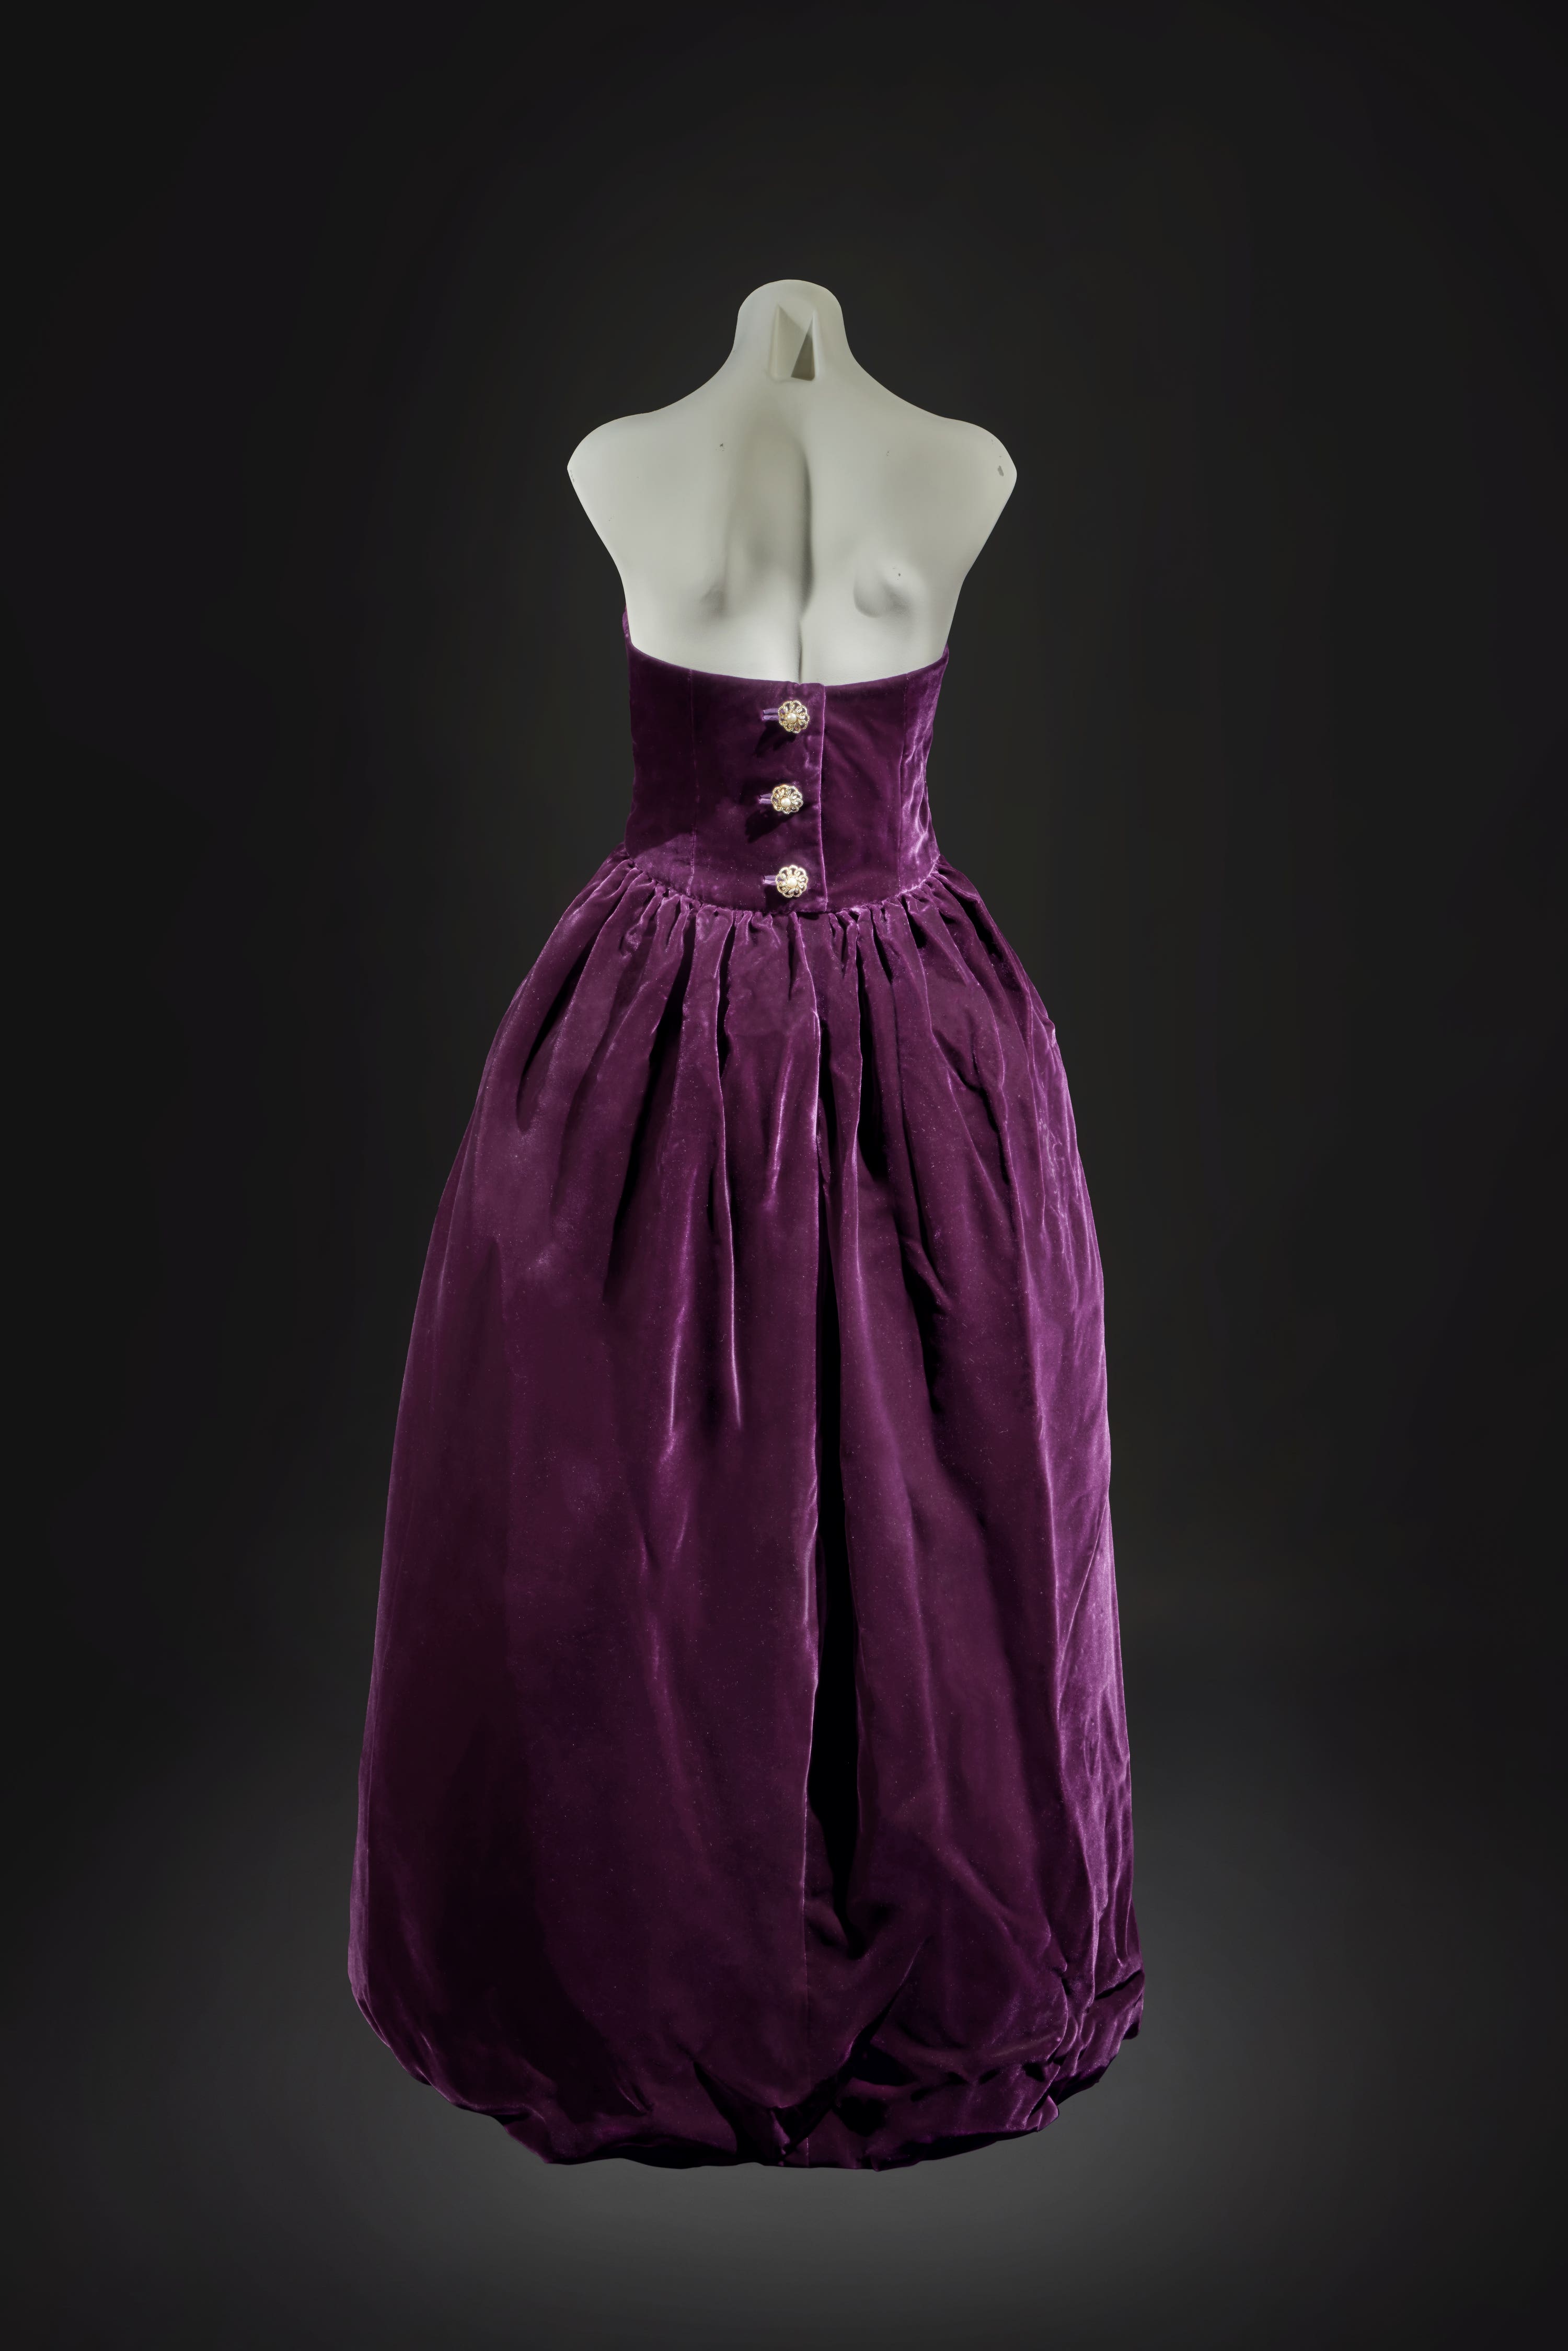 The ball dress is of deep aubergine silk velvet, with a tulip-shaped stiffened skirt, augmented by three paste buttons at the back. 